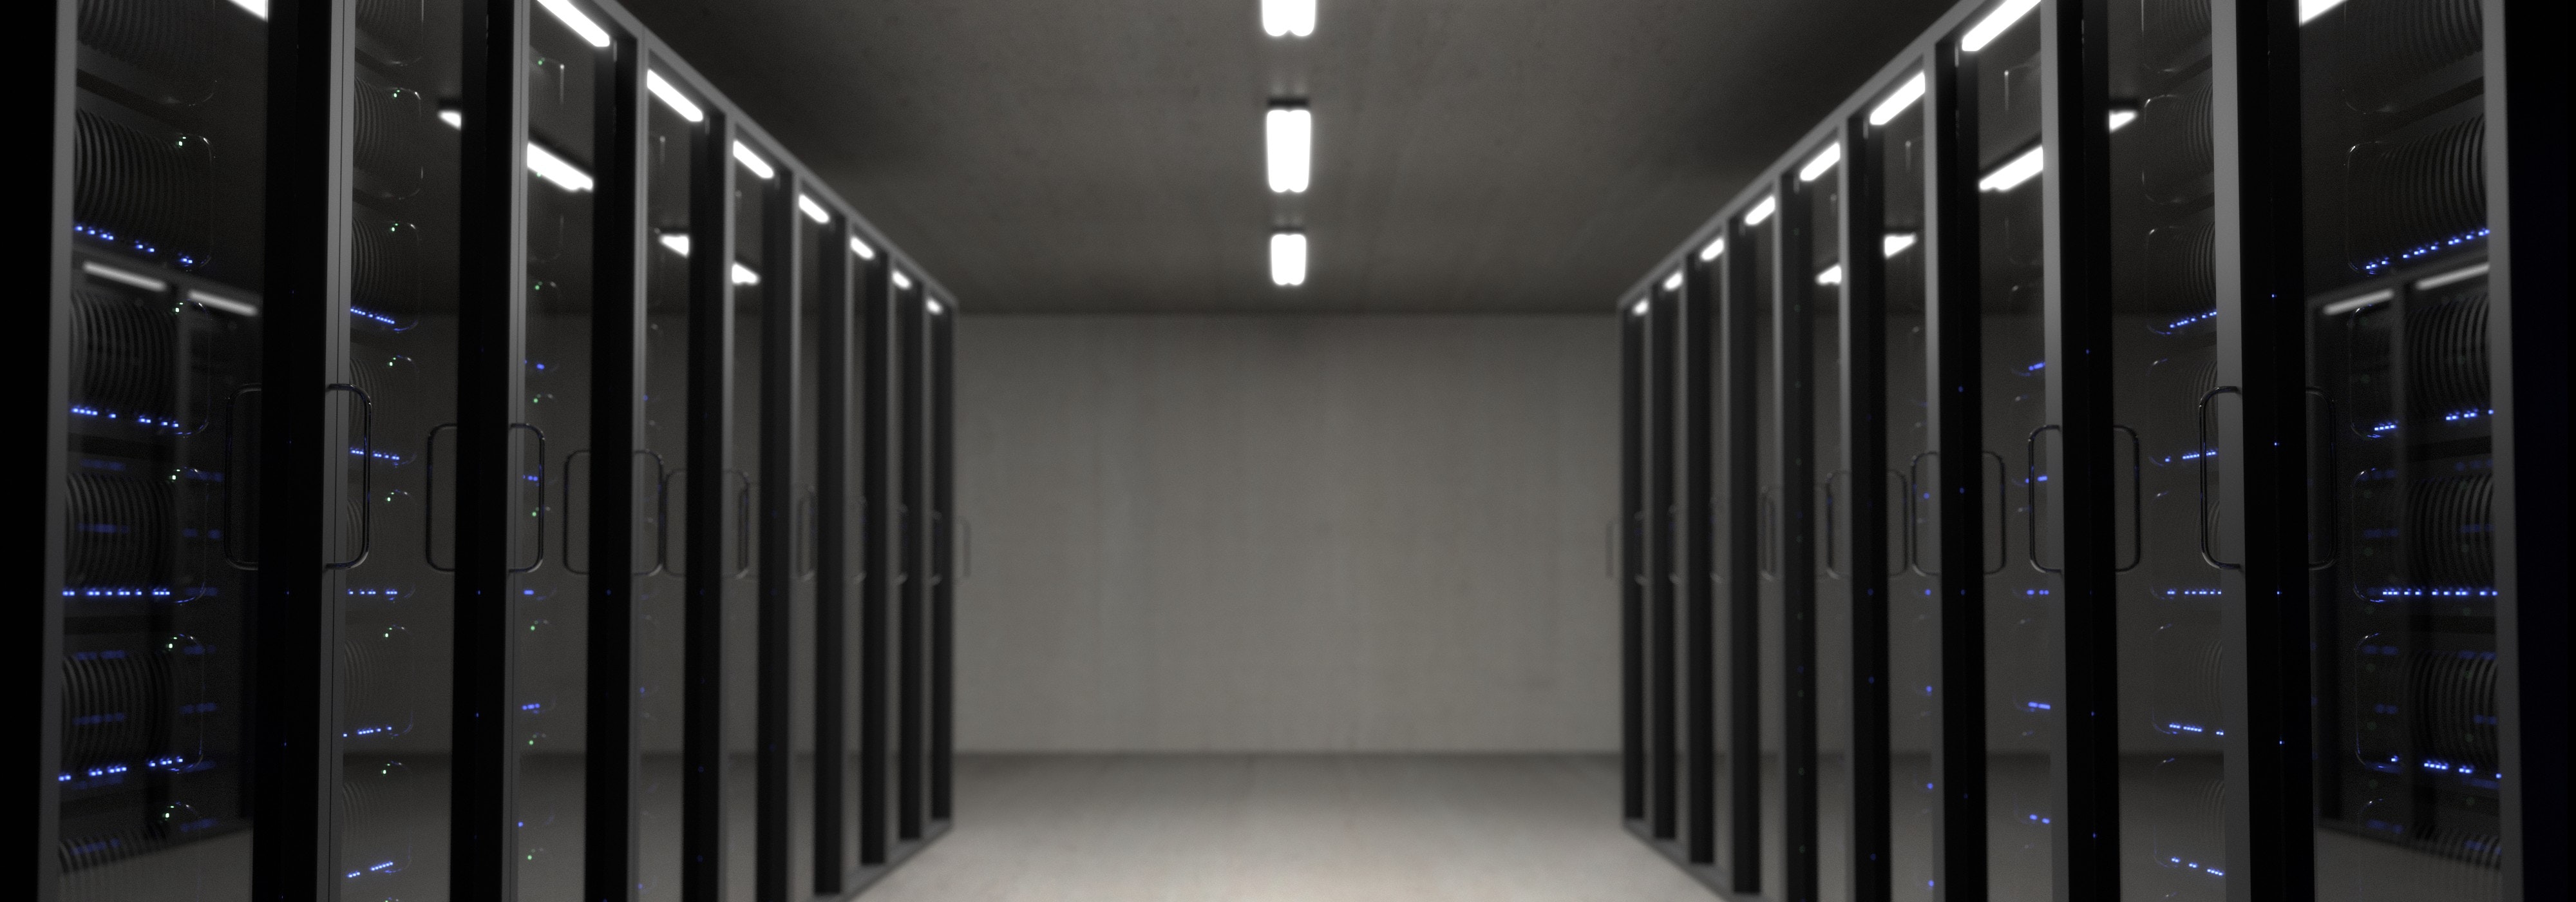 A server room with multiple servers, showing SatSense's capability to process millions of InSAR data points every week